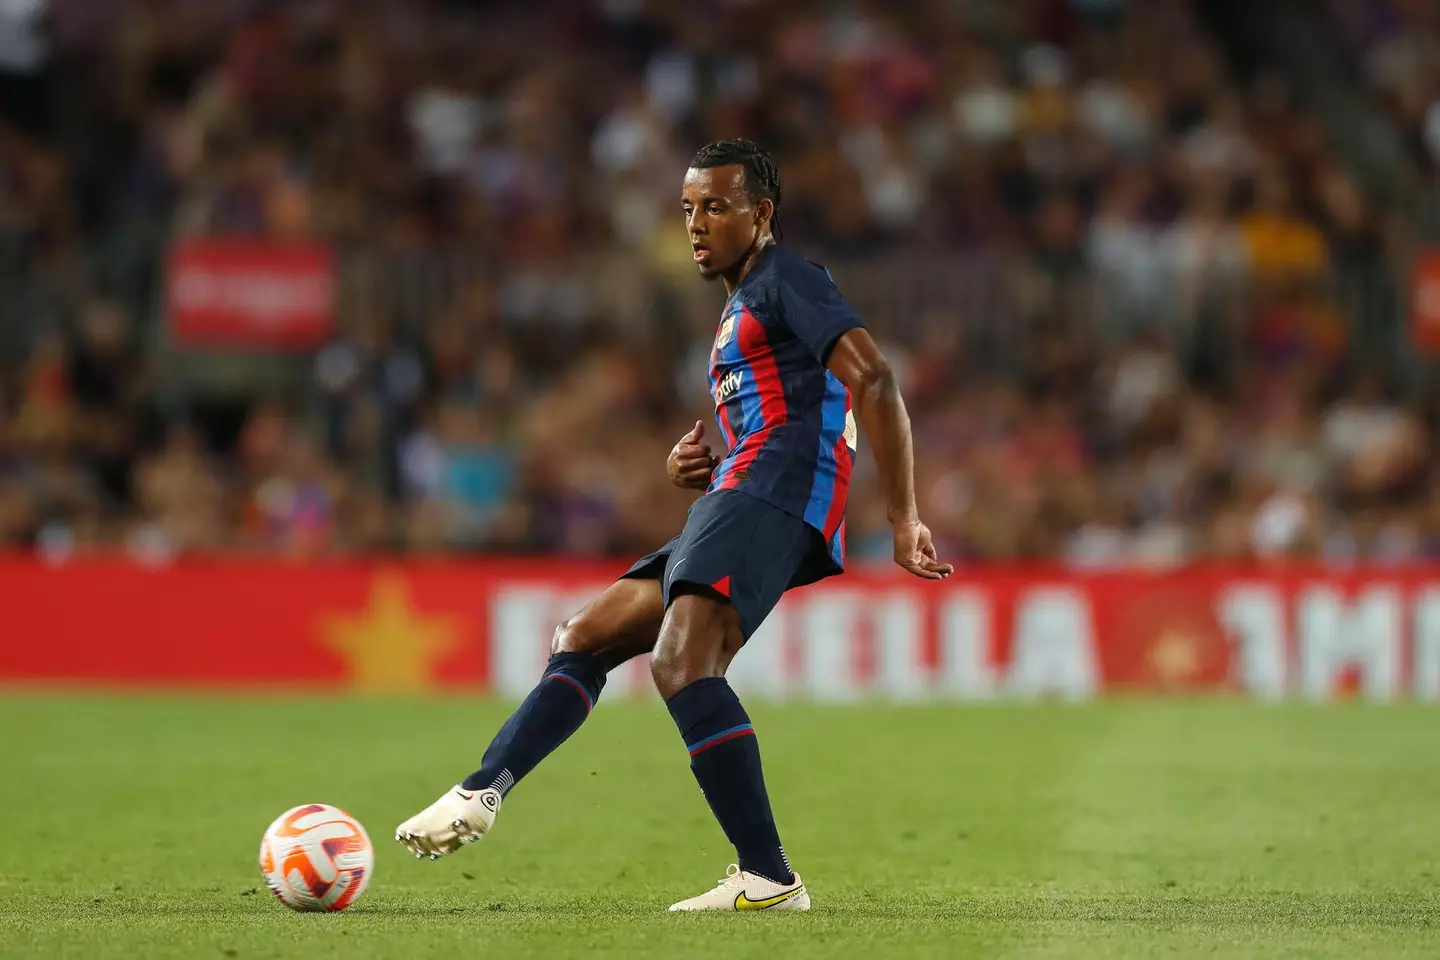 Jules Kounde is yet to play a professional game for Barcelona. (Image